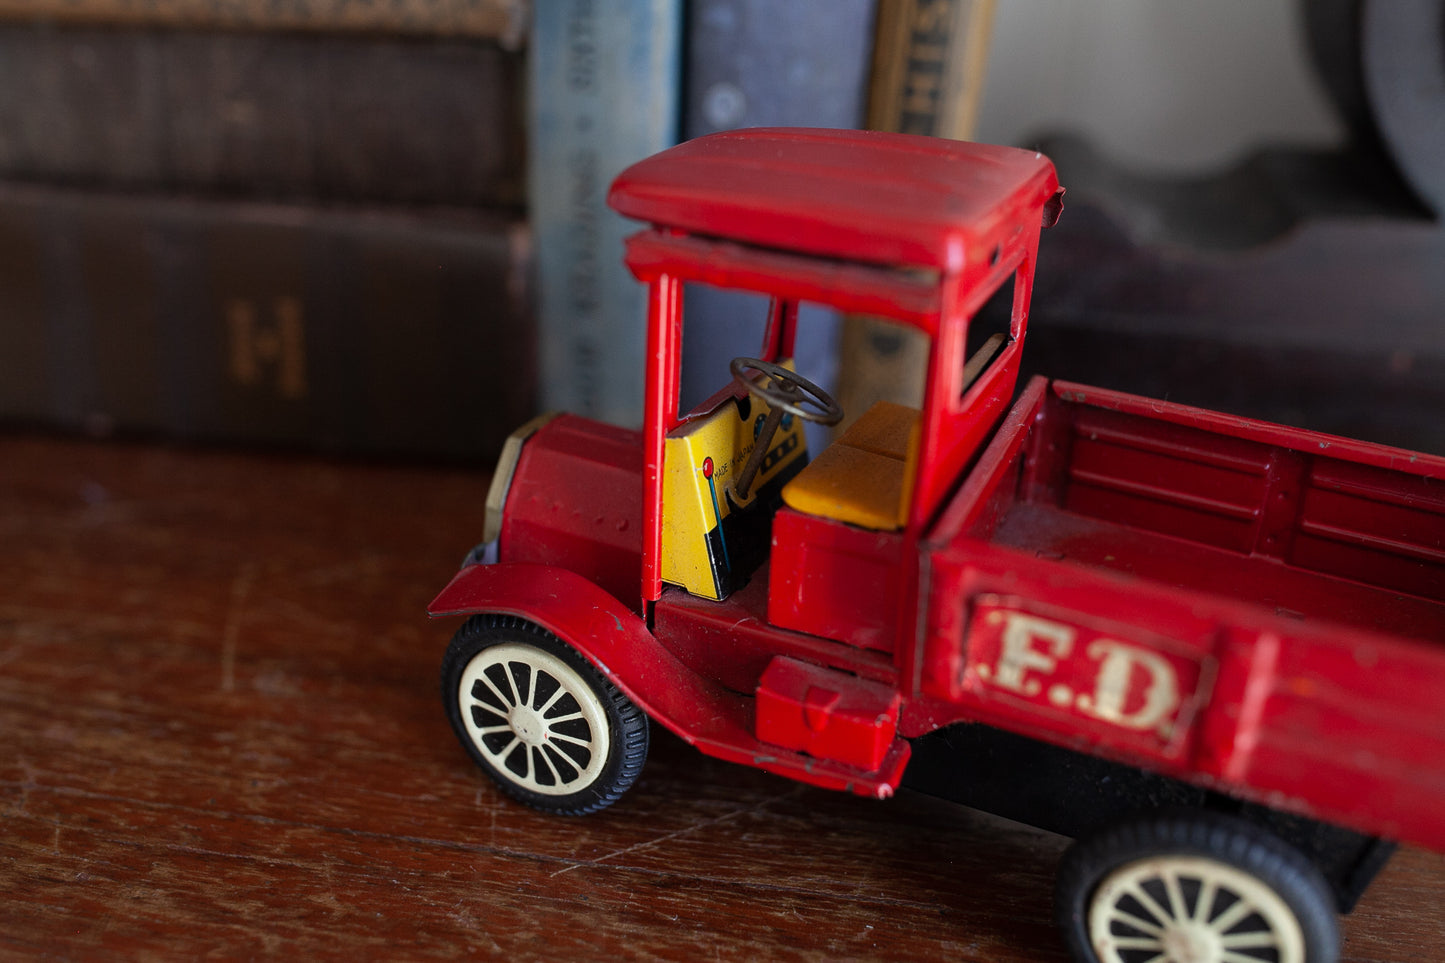 Vintage Toy Truck - Tin Toy Fire Truck -Made in Japan -Friction Toy